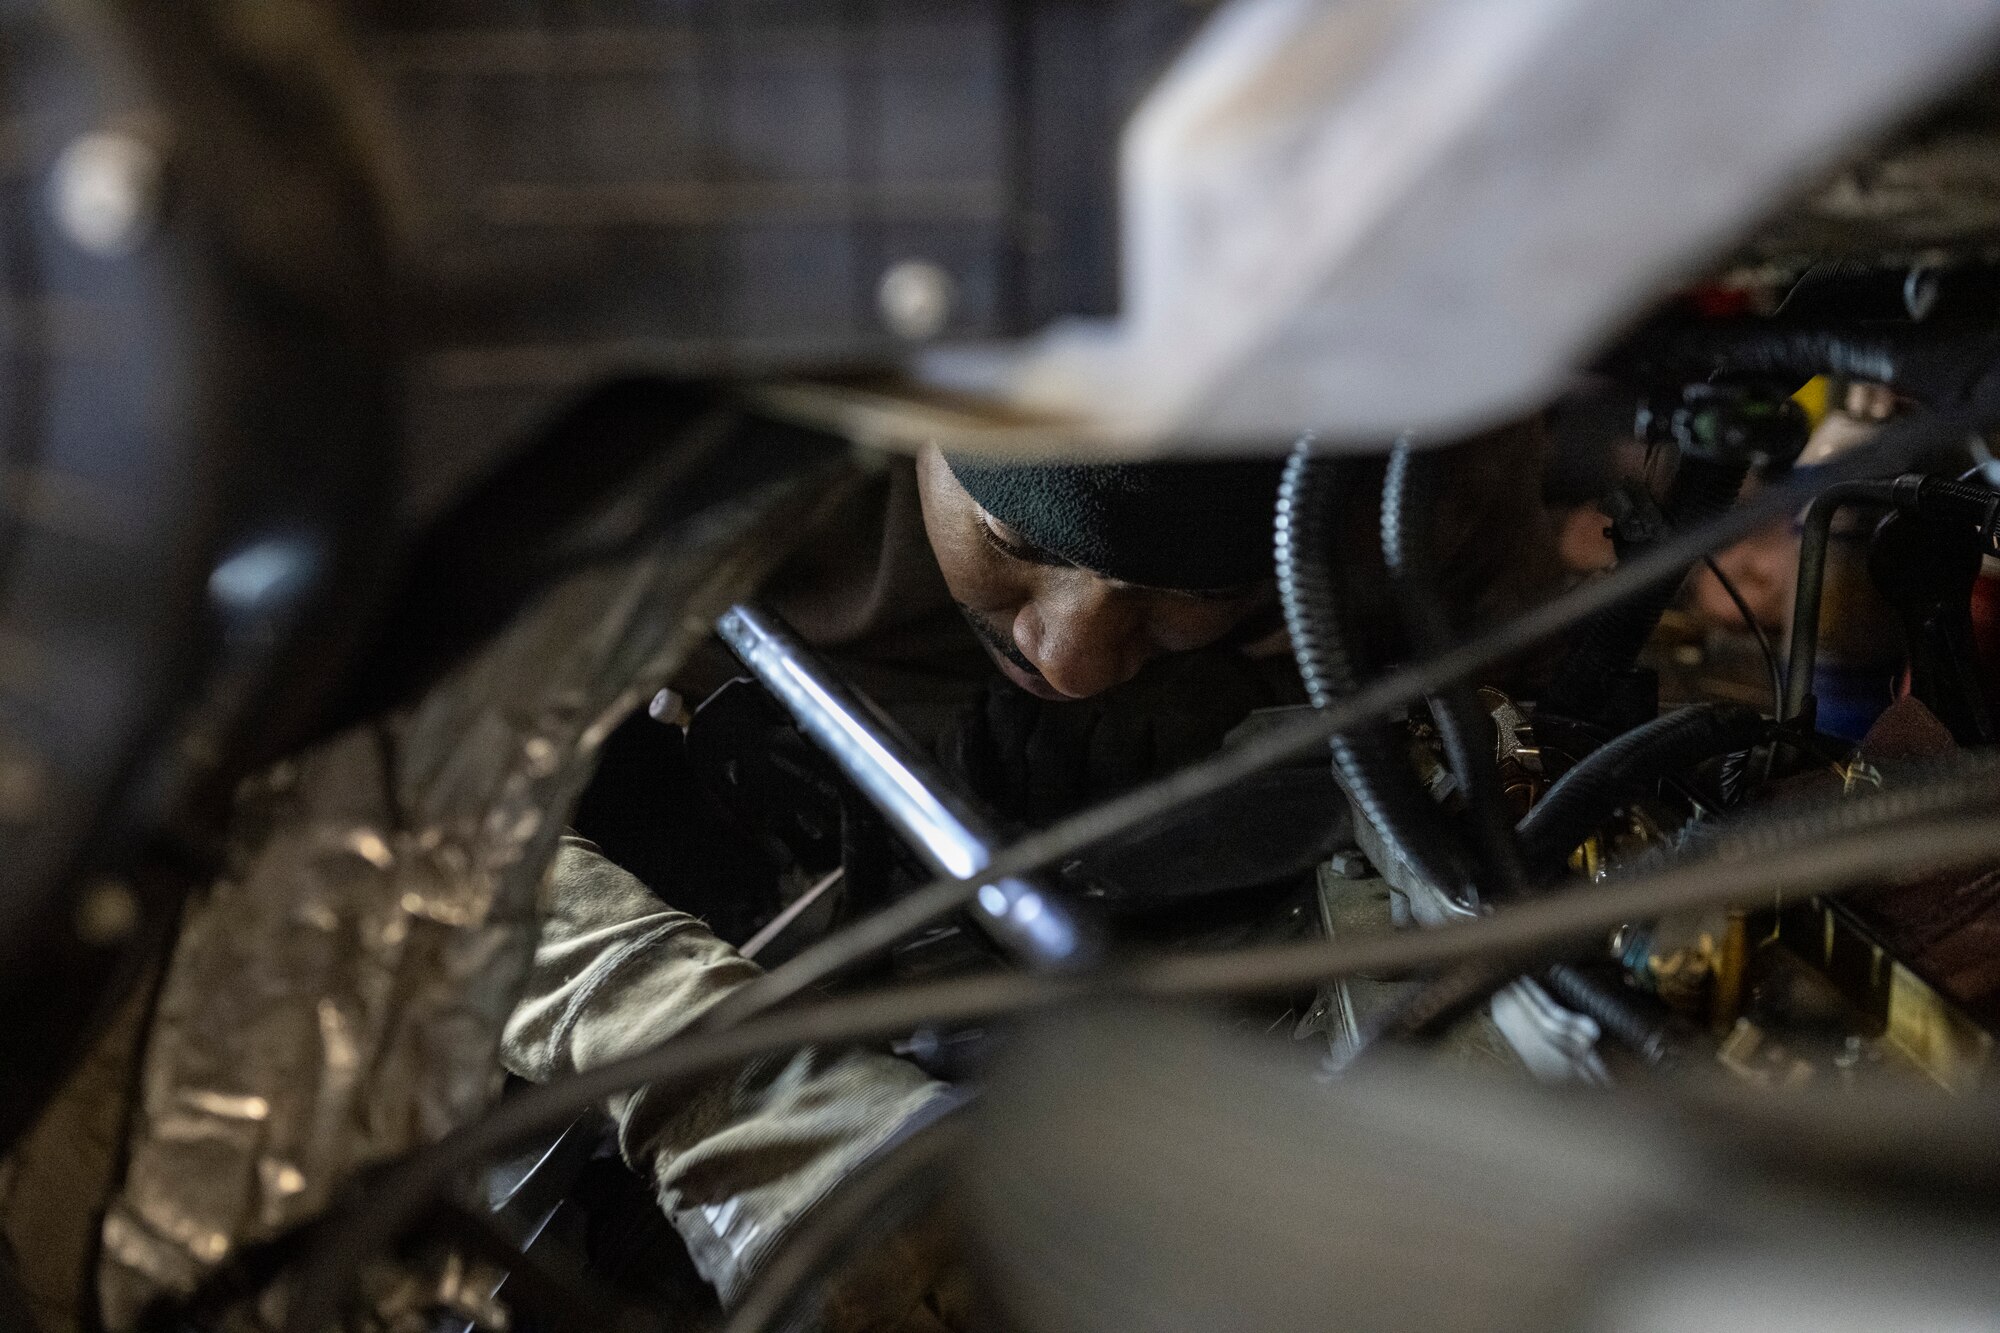 A photo of an Airmen through the wires of a van under the hood.